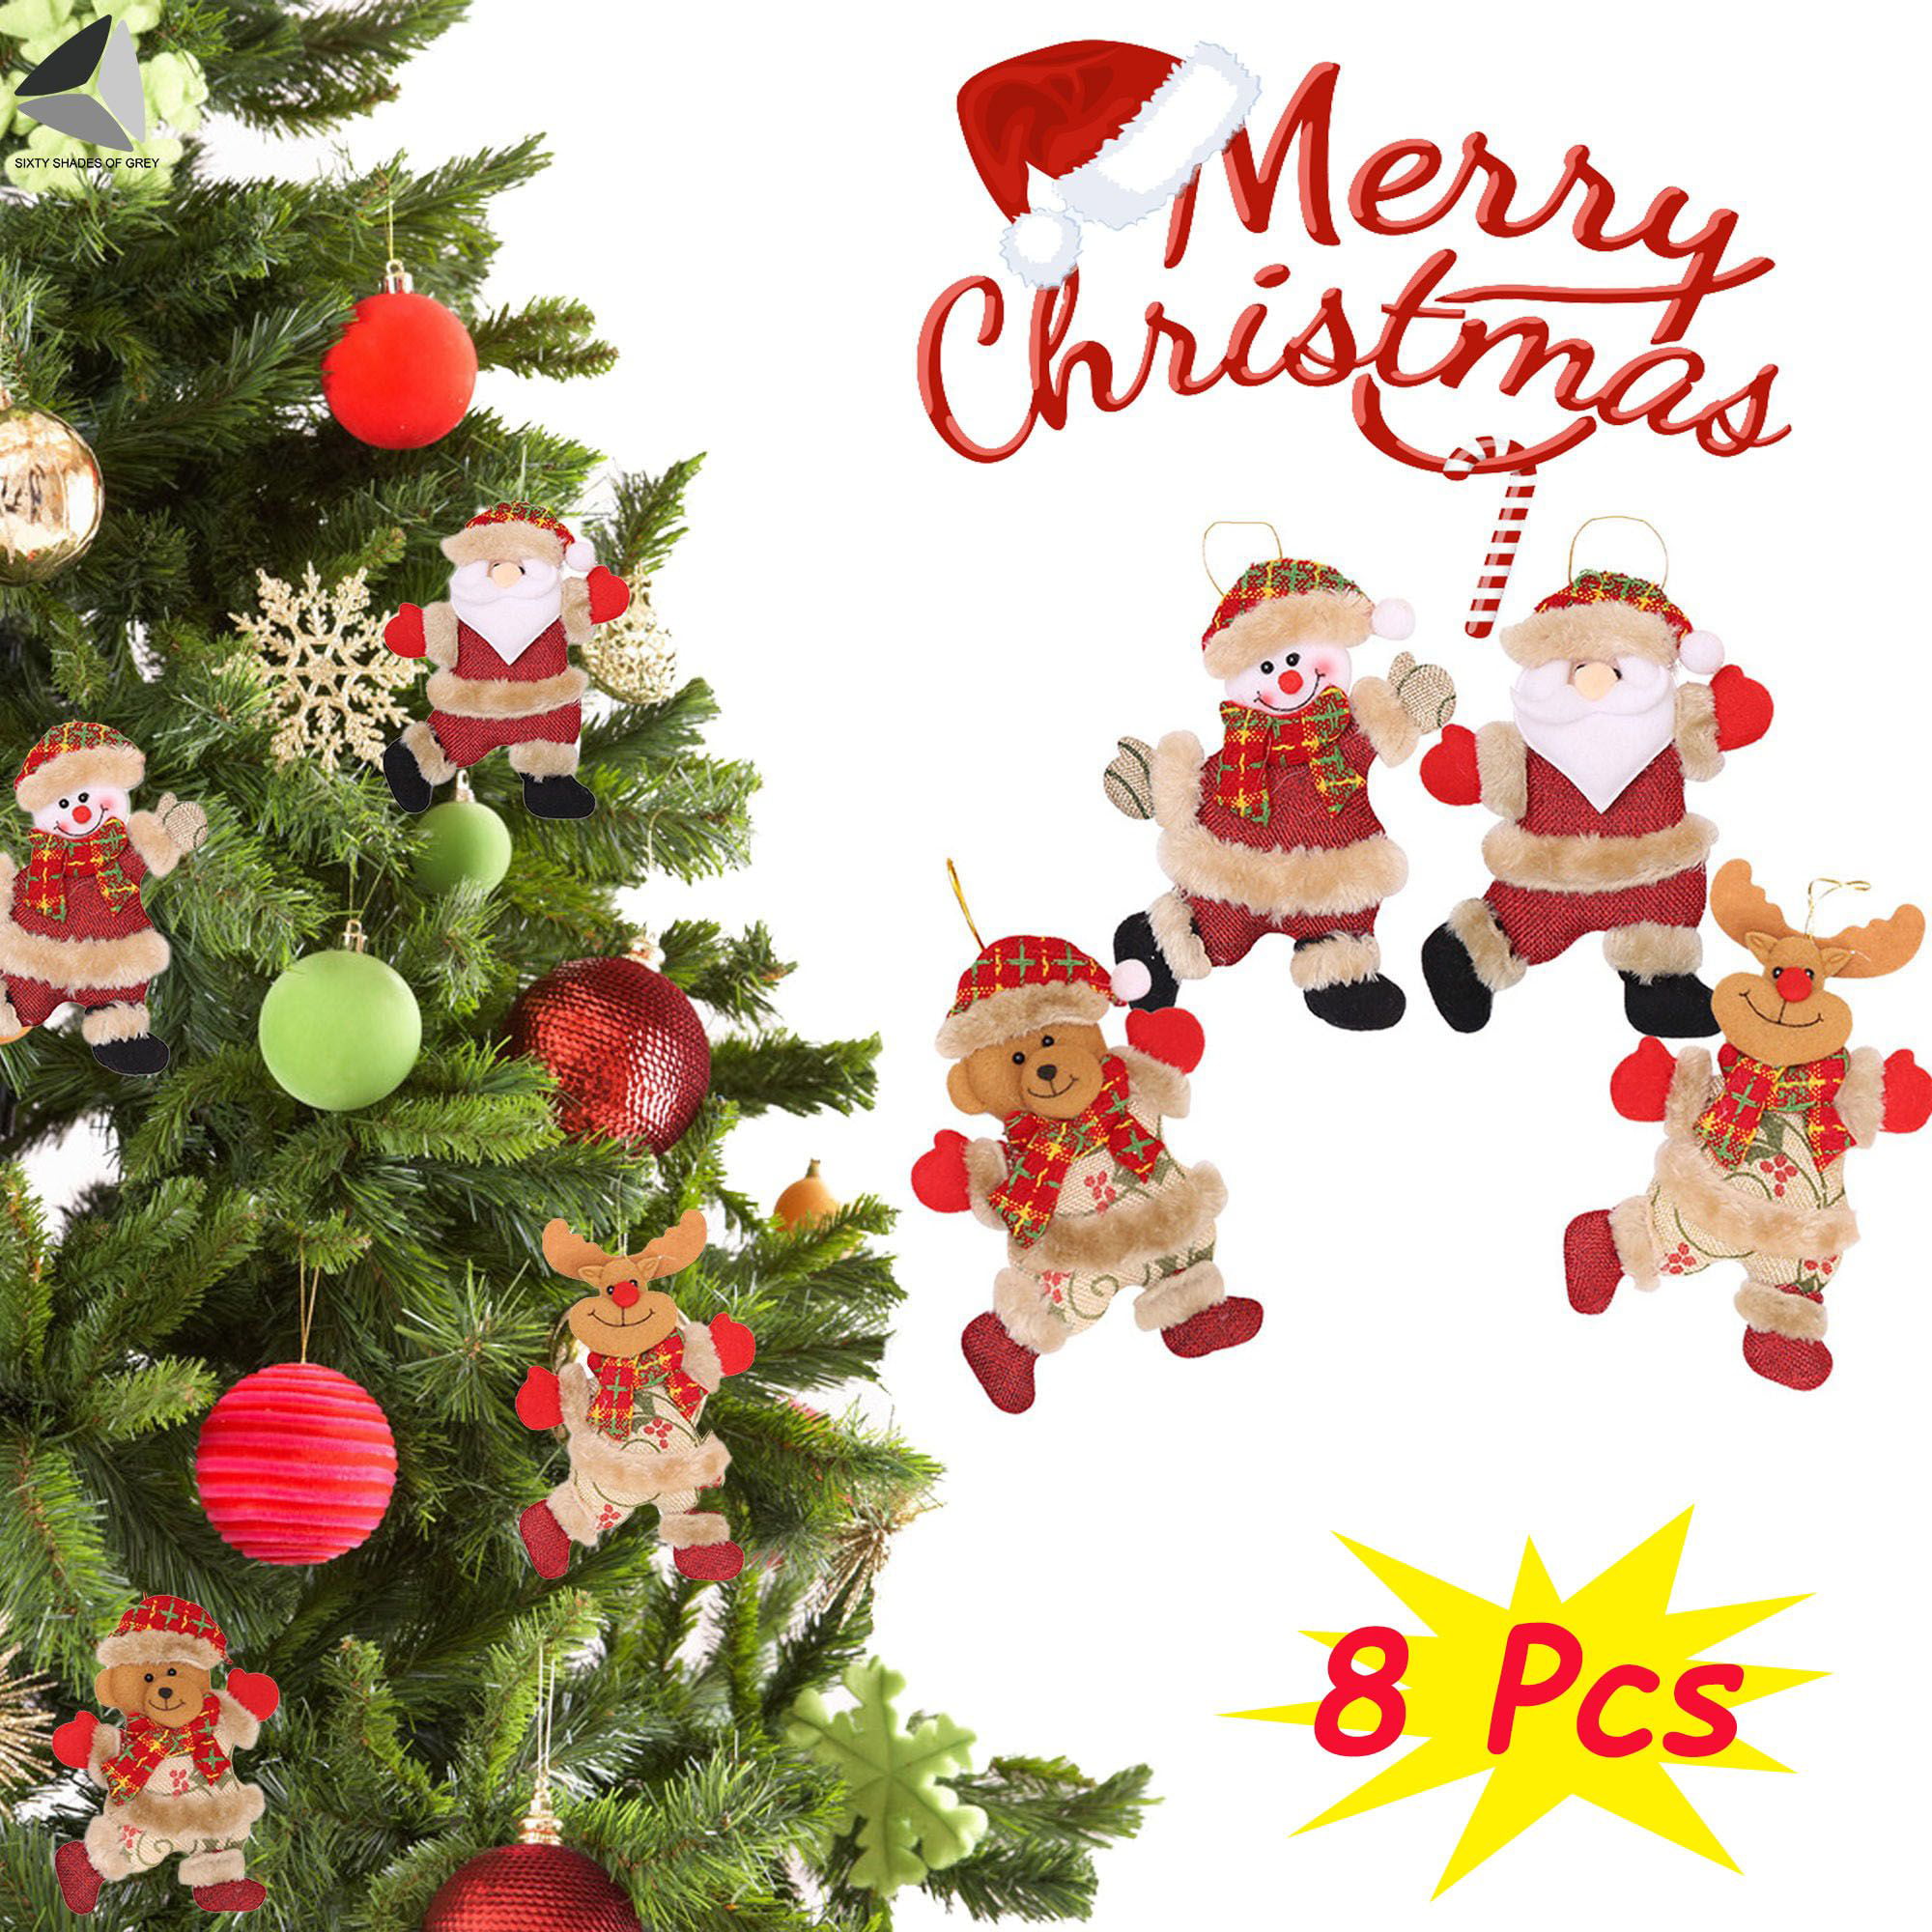 6PCS Christmas Tree Hanging Mini Red Santa Claus Dolls Home New Year Party Decor 